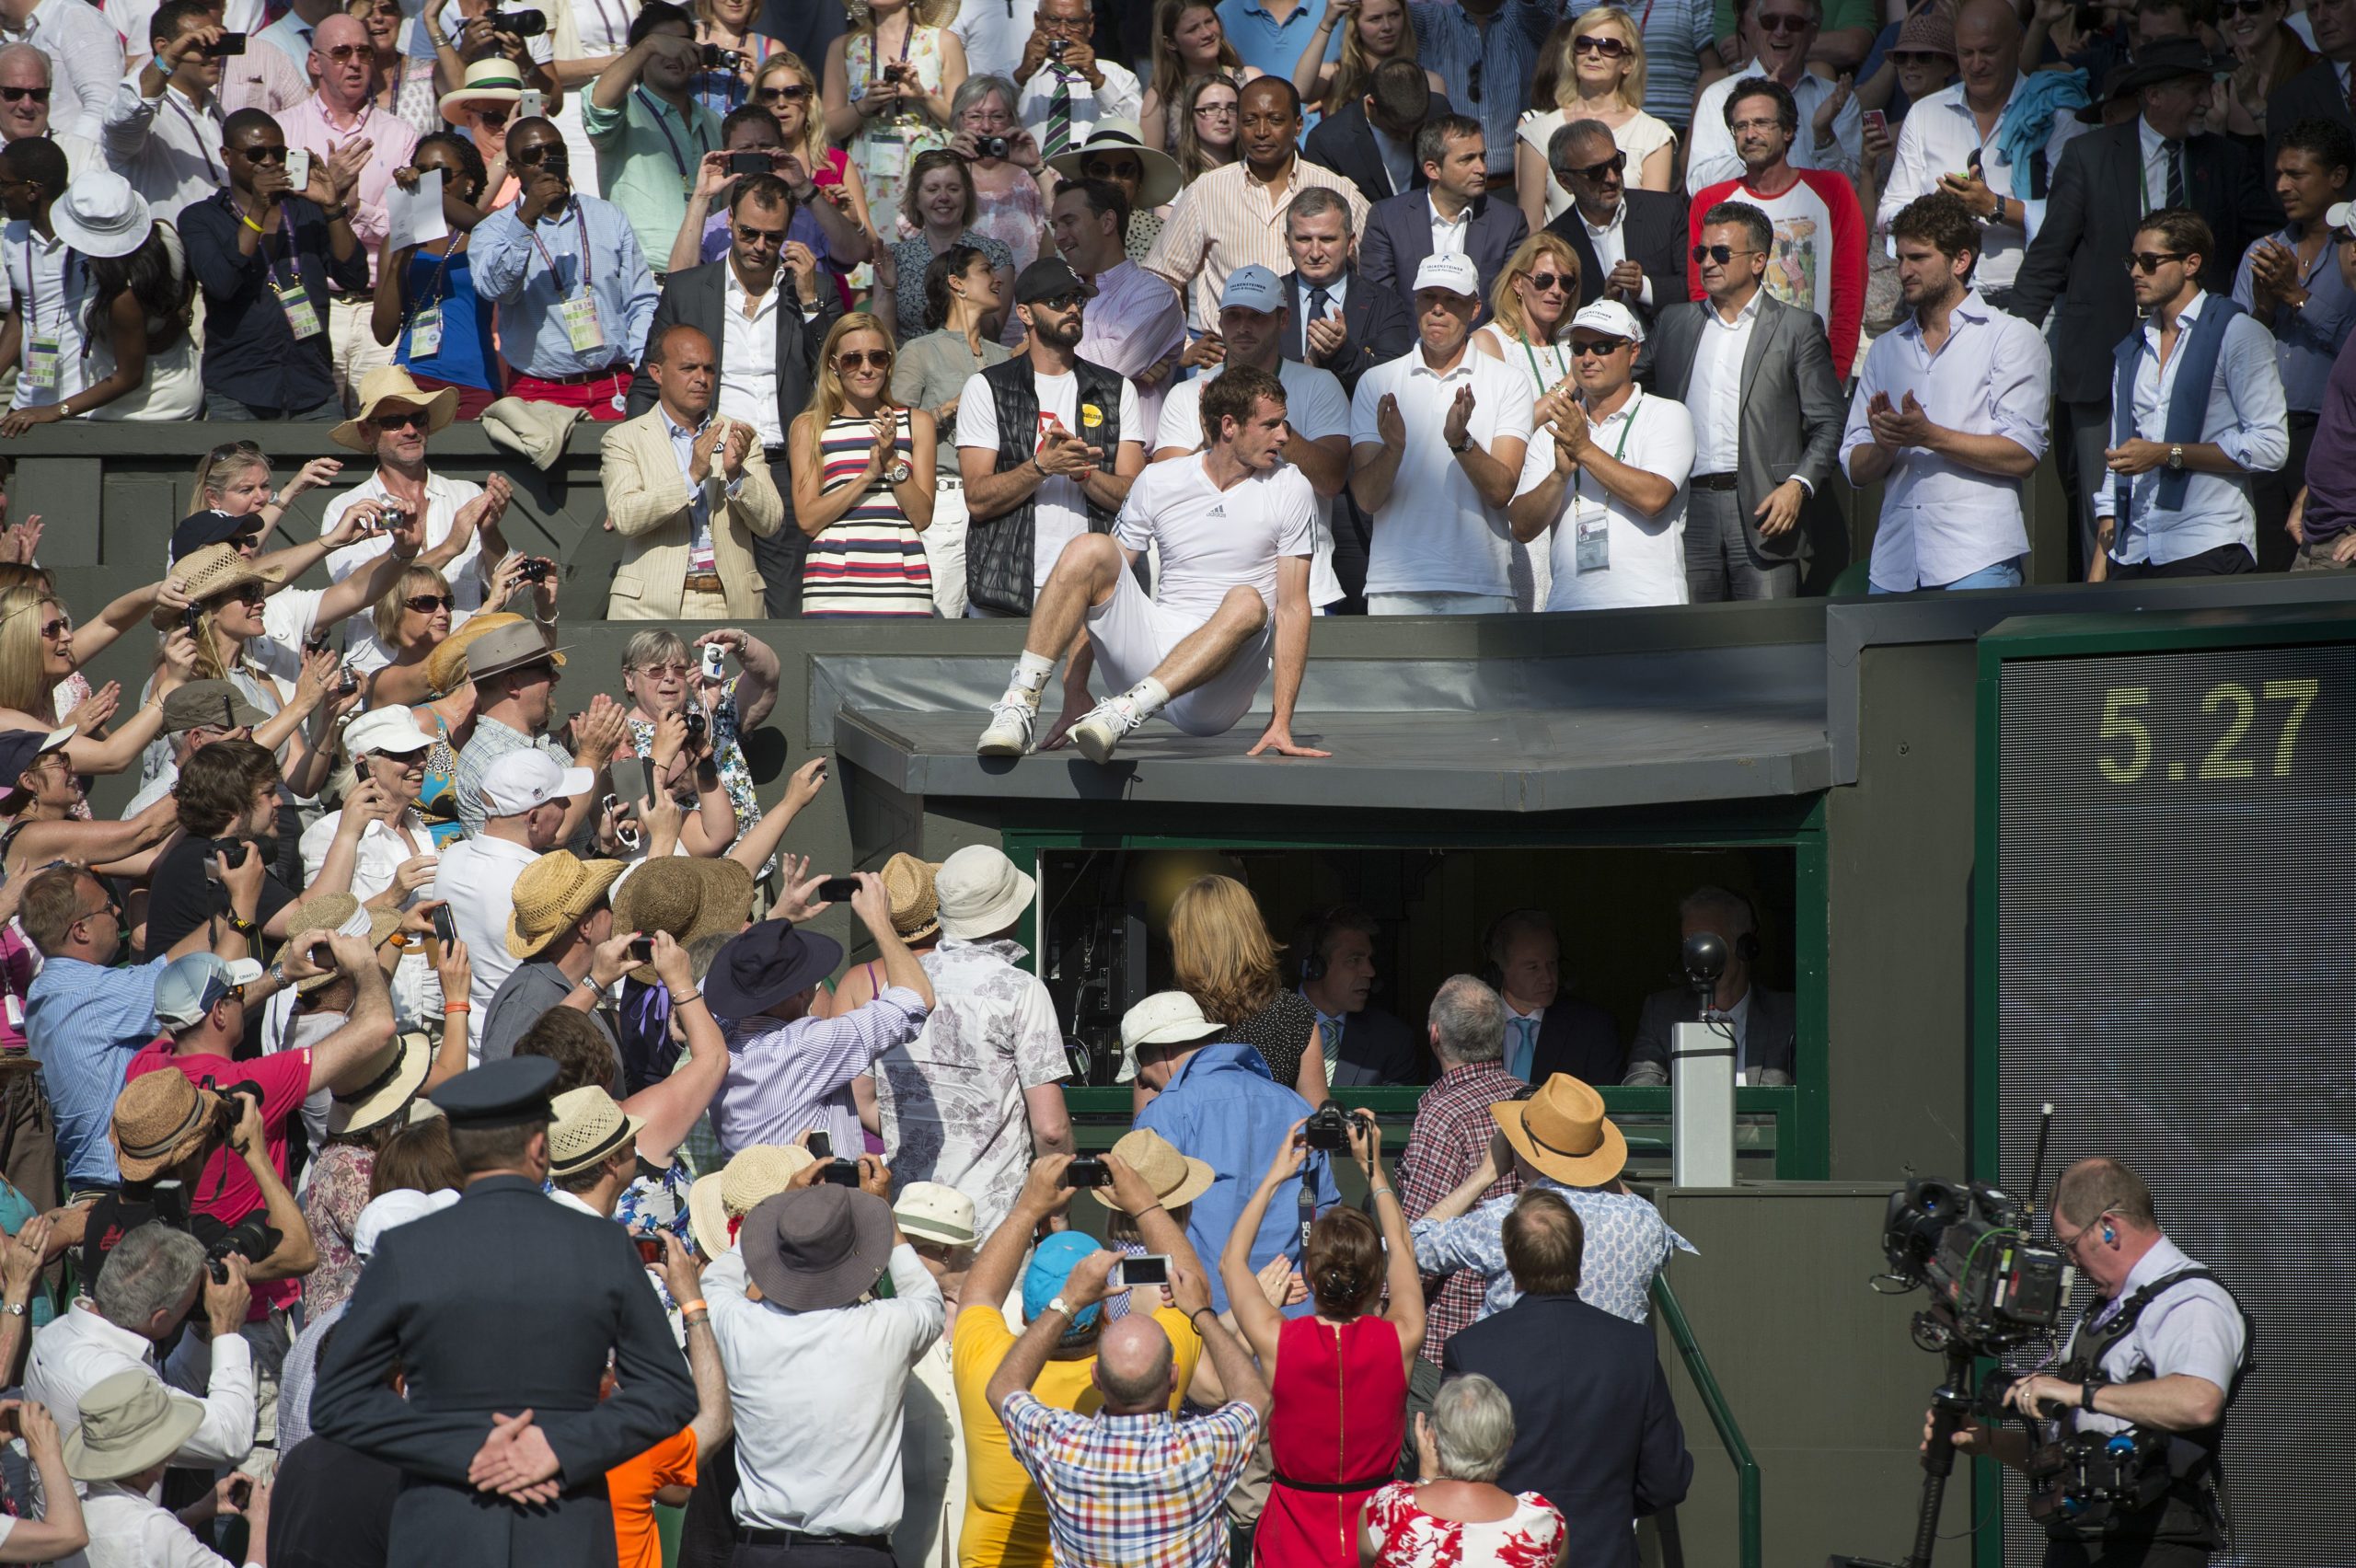 Andy climbs up to the Centre Court players’ box after 2013 Wimbledon final but mum isn’t there